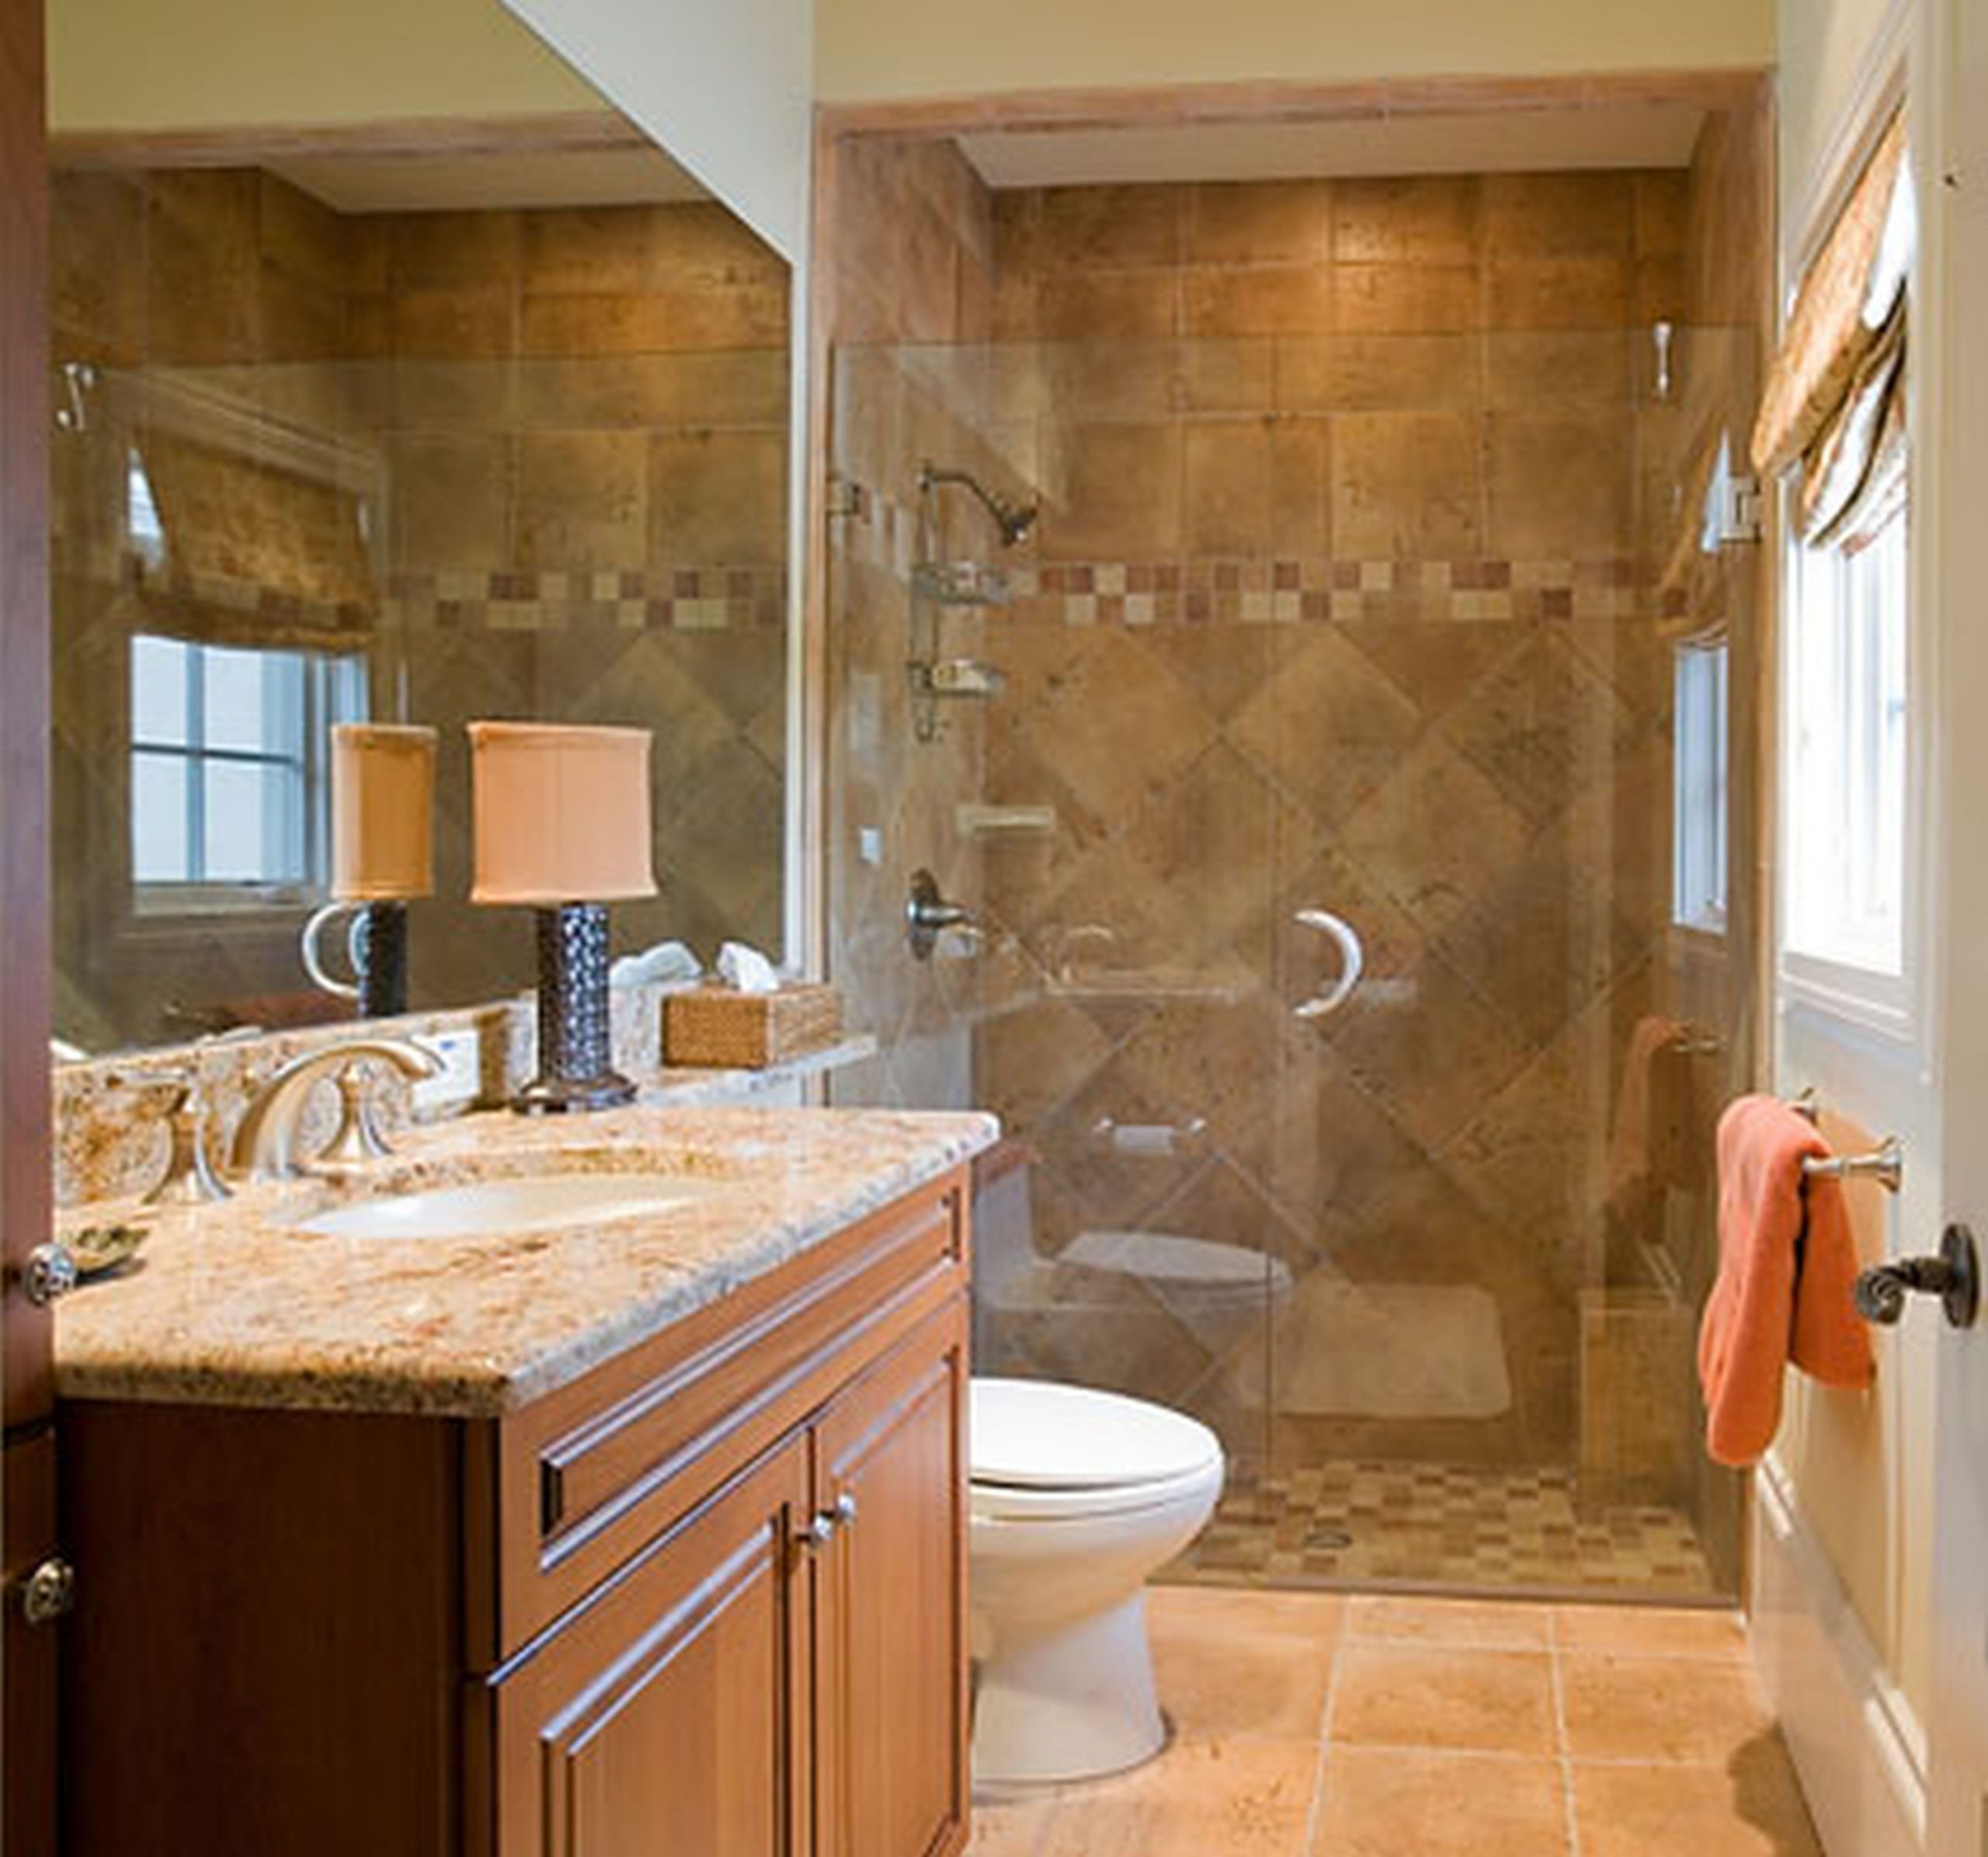 Small Shower Bathroom Ideas
 Small Bathroom Remodel Ideas in Varied Modern Concepts